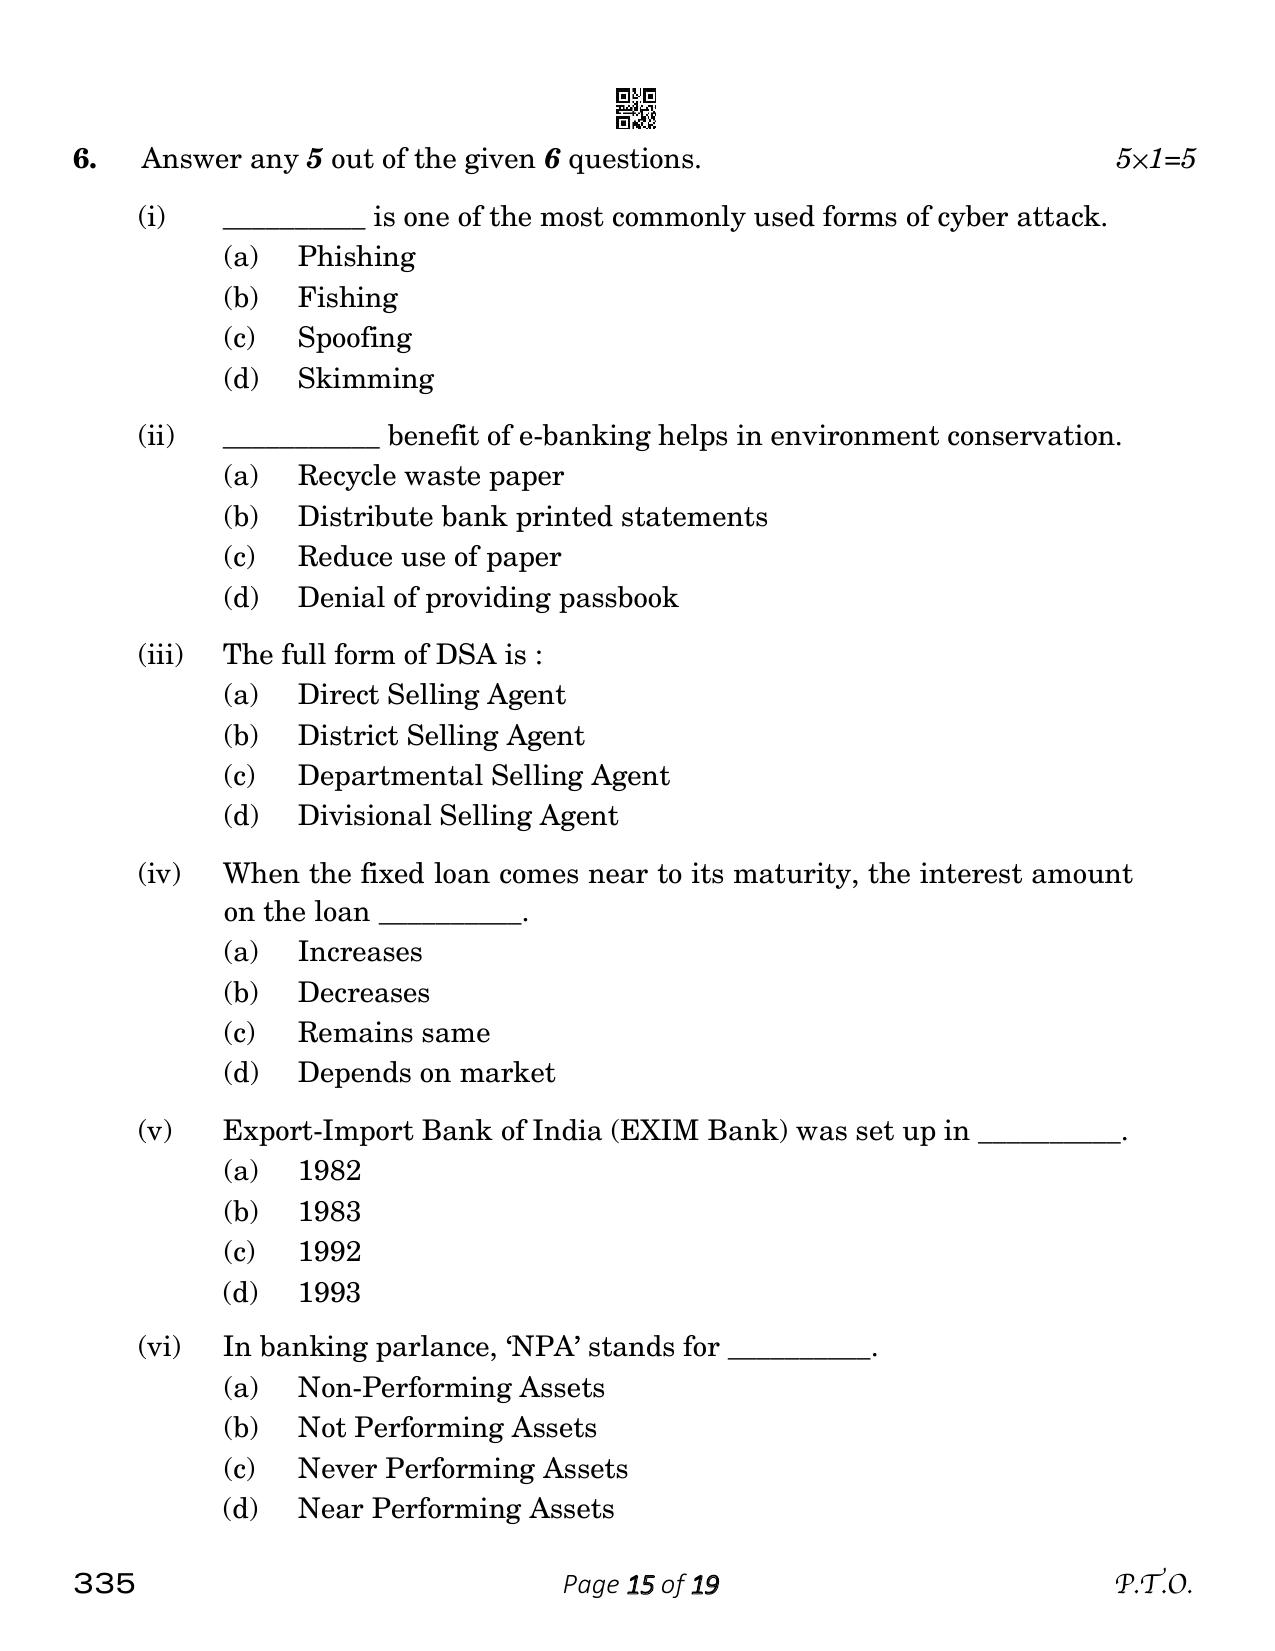 CBSE Class 12 Banking (Compartment) 2023 Question Paper - Page 15